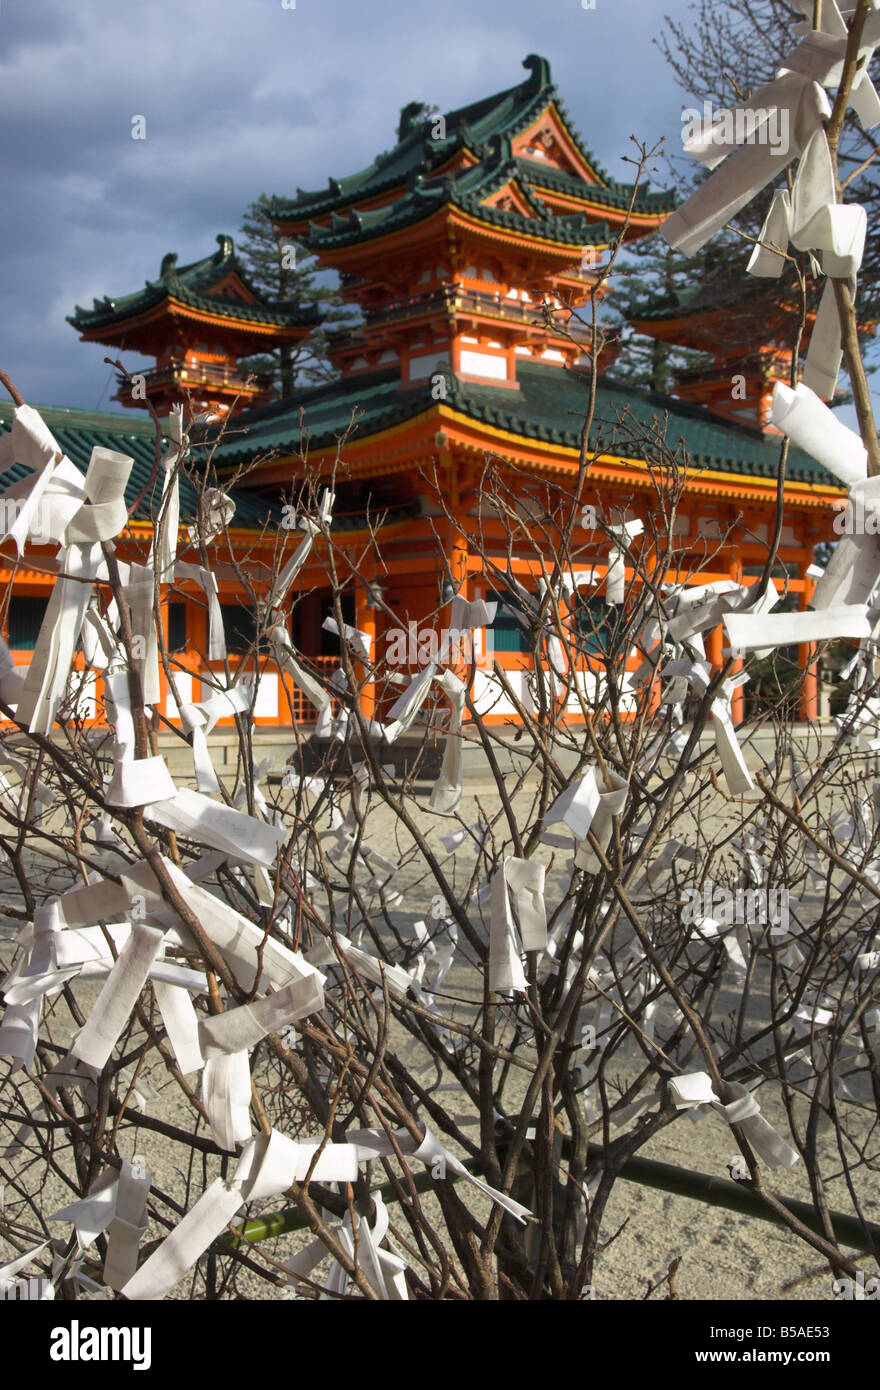 Fate and wish papers tied on a bush branches in foreground and temple beyond, Heian Jingu shrine, Kyoto, Kansai, Honshu, Japan Stock Photo